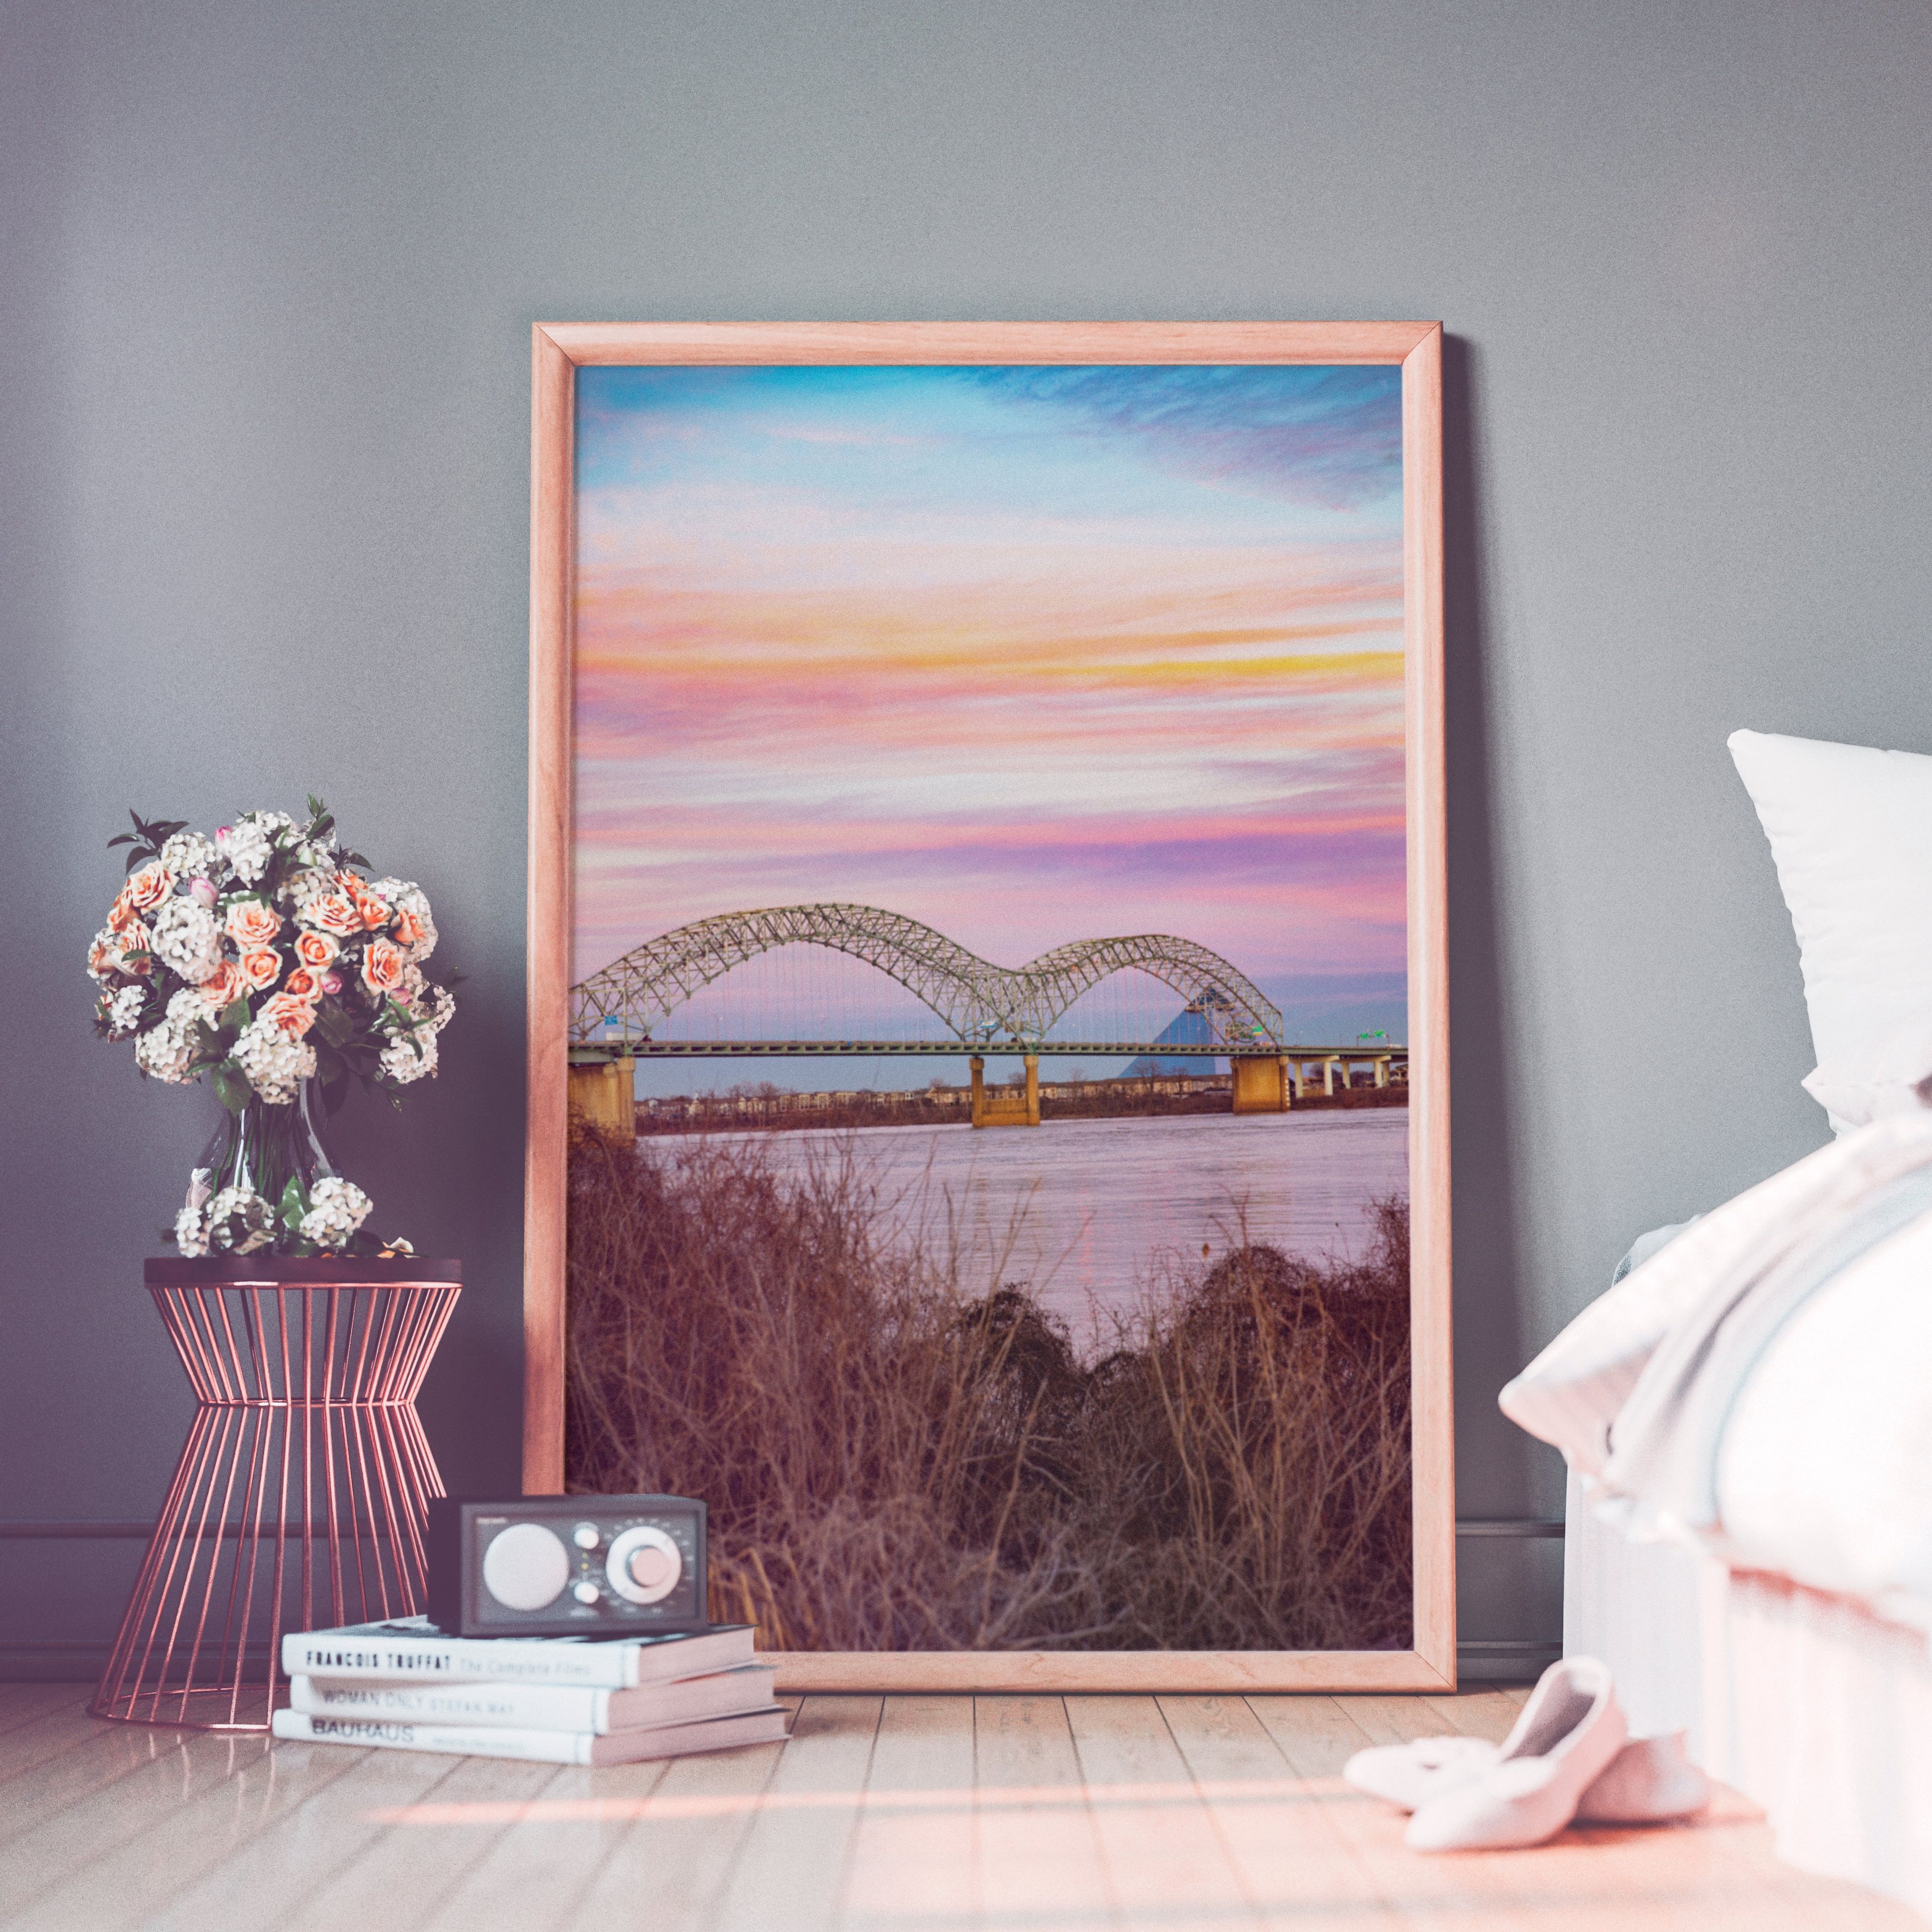 Memphis, Tennessee, bridge at sunset cotton candy skies photography print